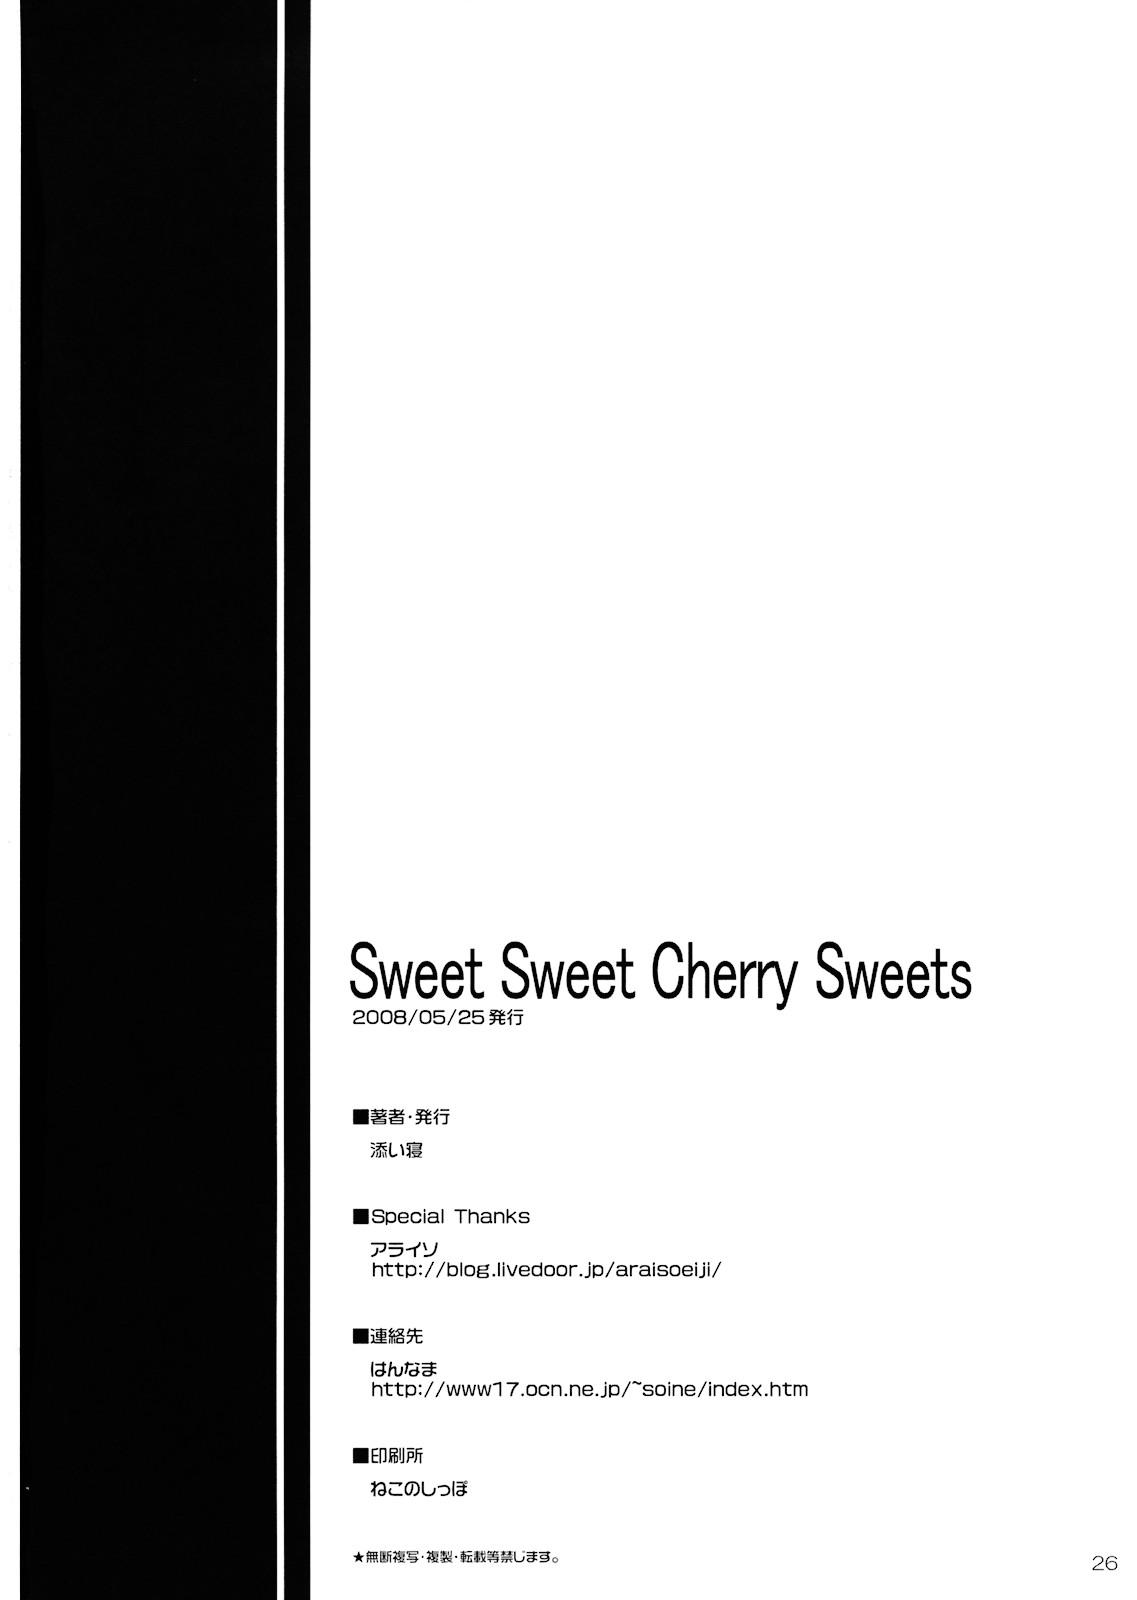 Porn Sweet Sweet Cherry Sweets - Touhou project Fishnet - Page 26